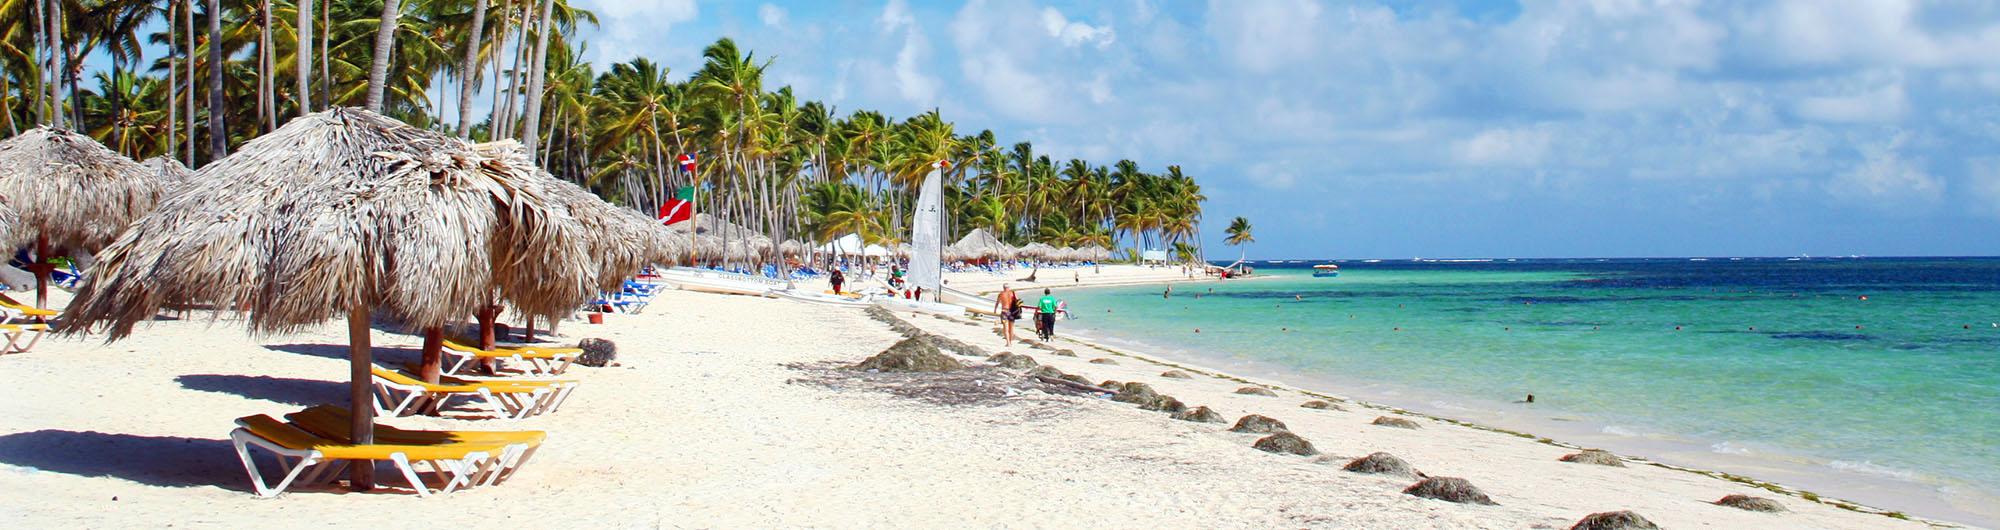 Search and compare cheap flights from San Juan to Punta Cana